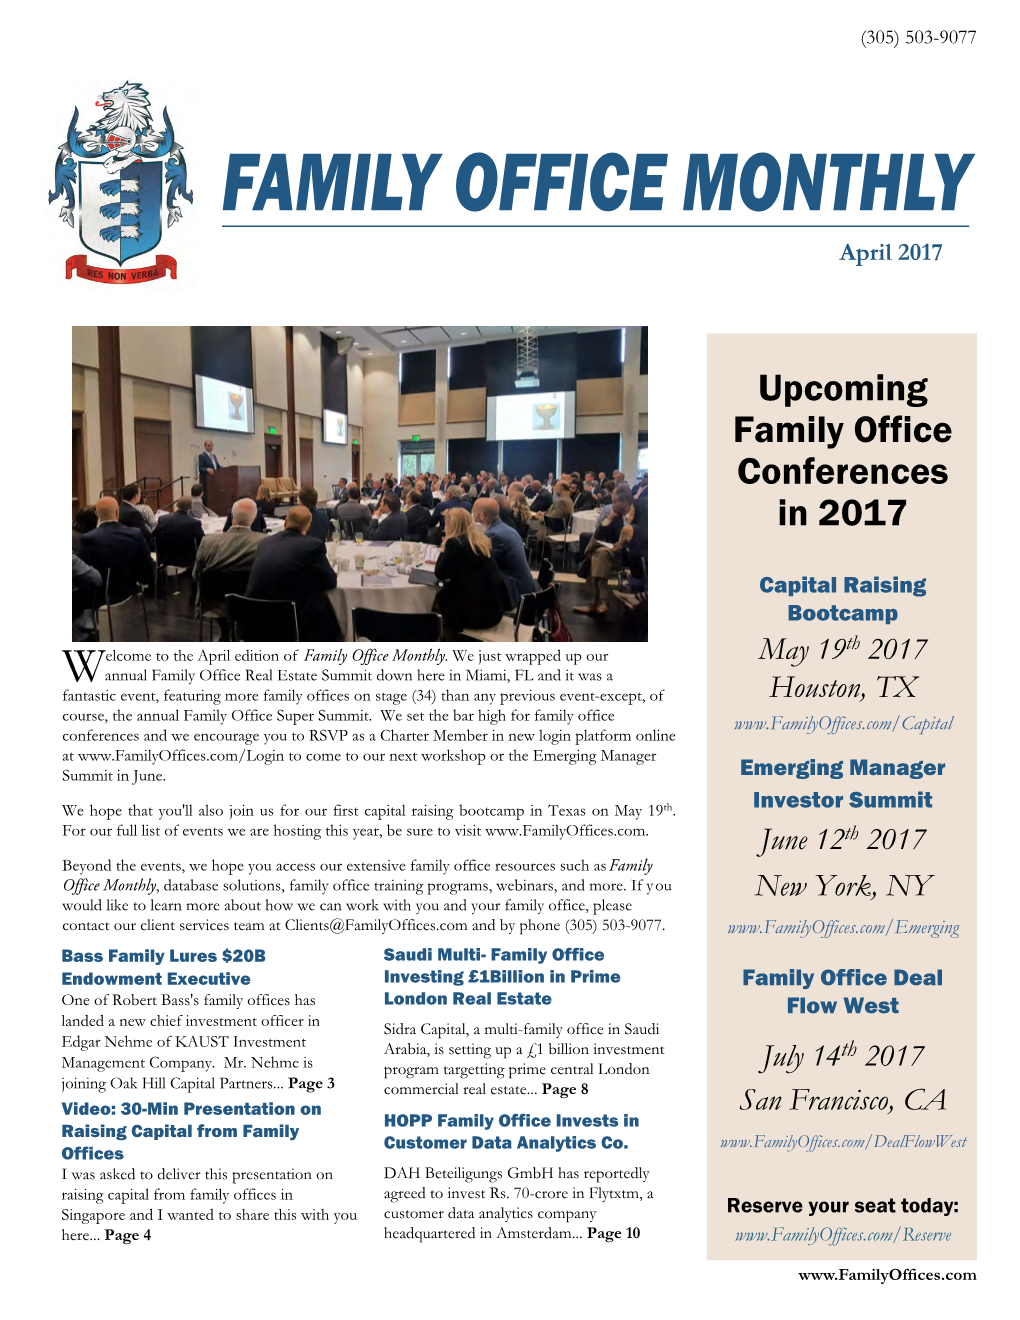 FAMILY OFFICE MONTHLY April 2017